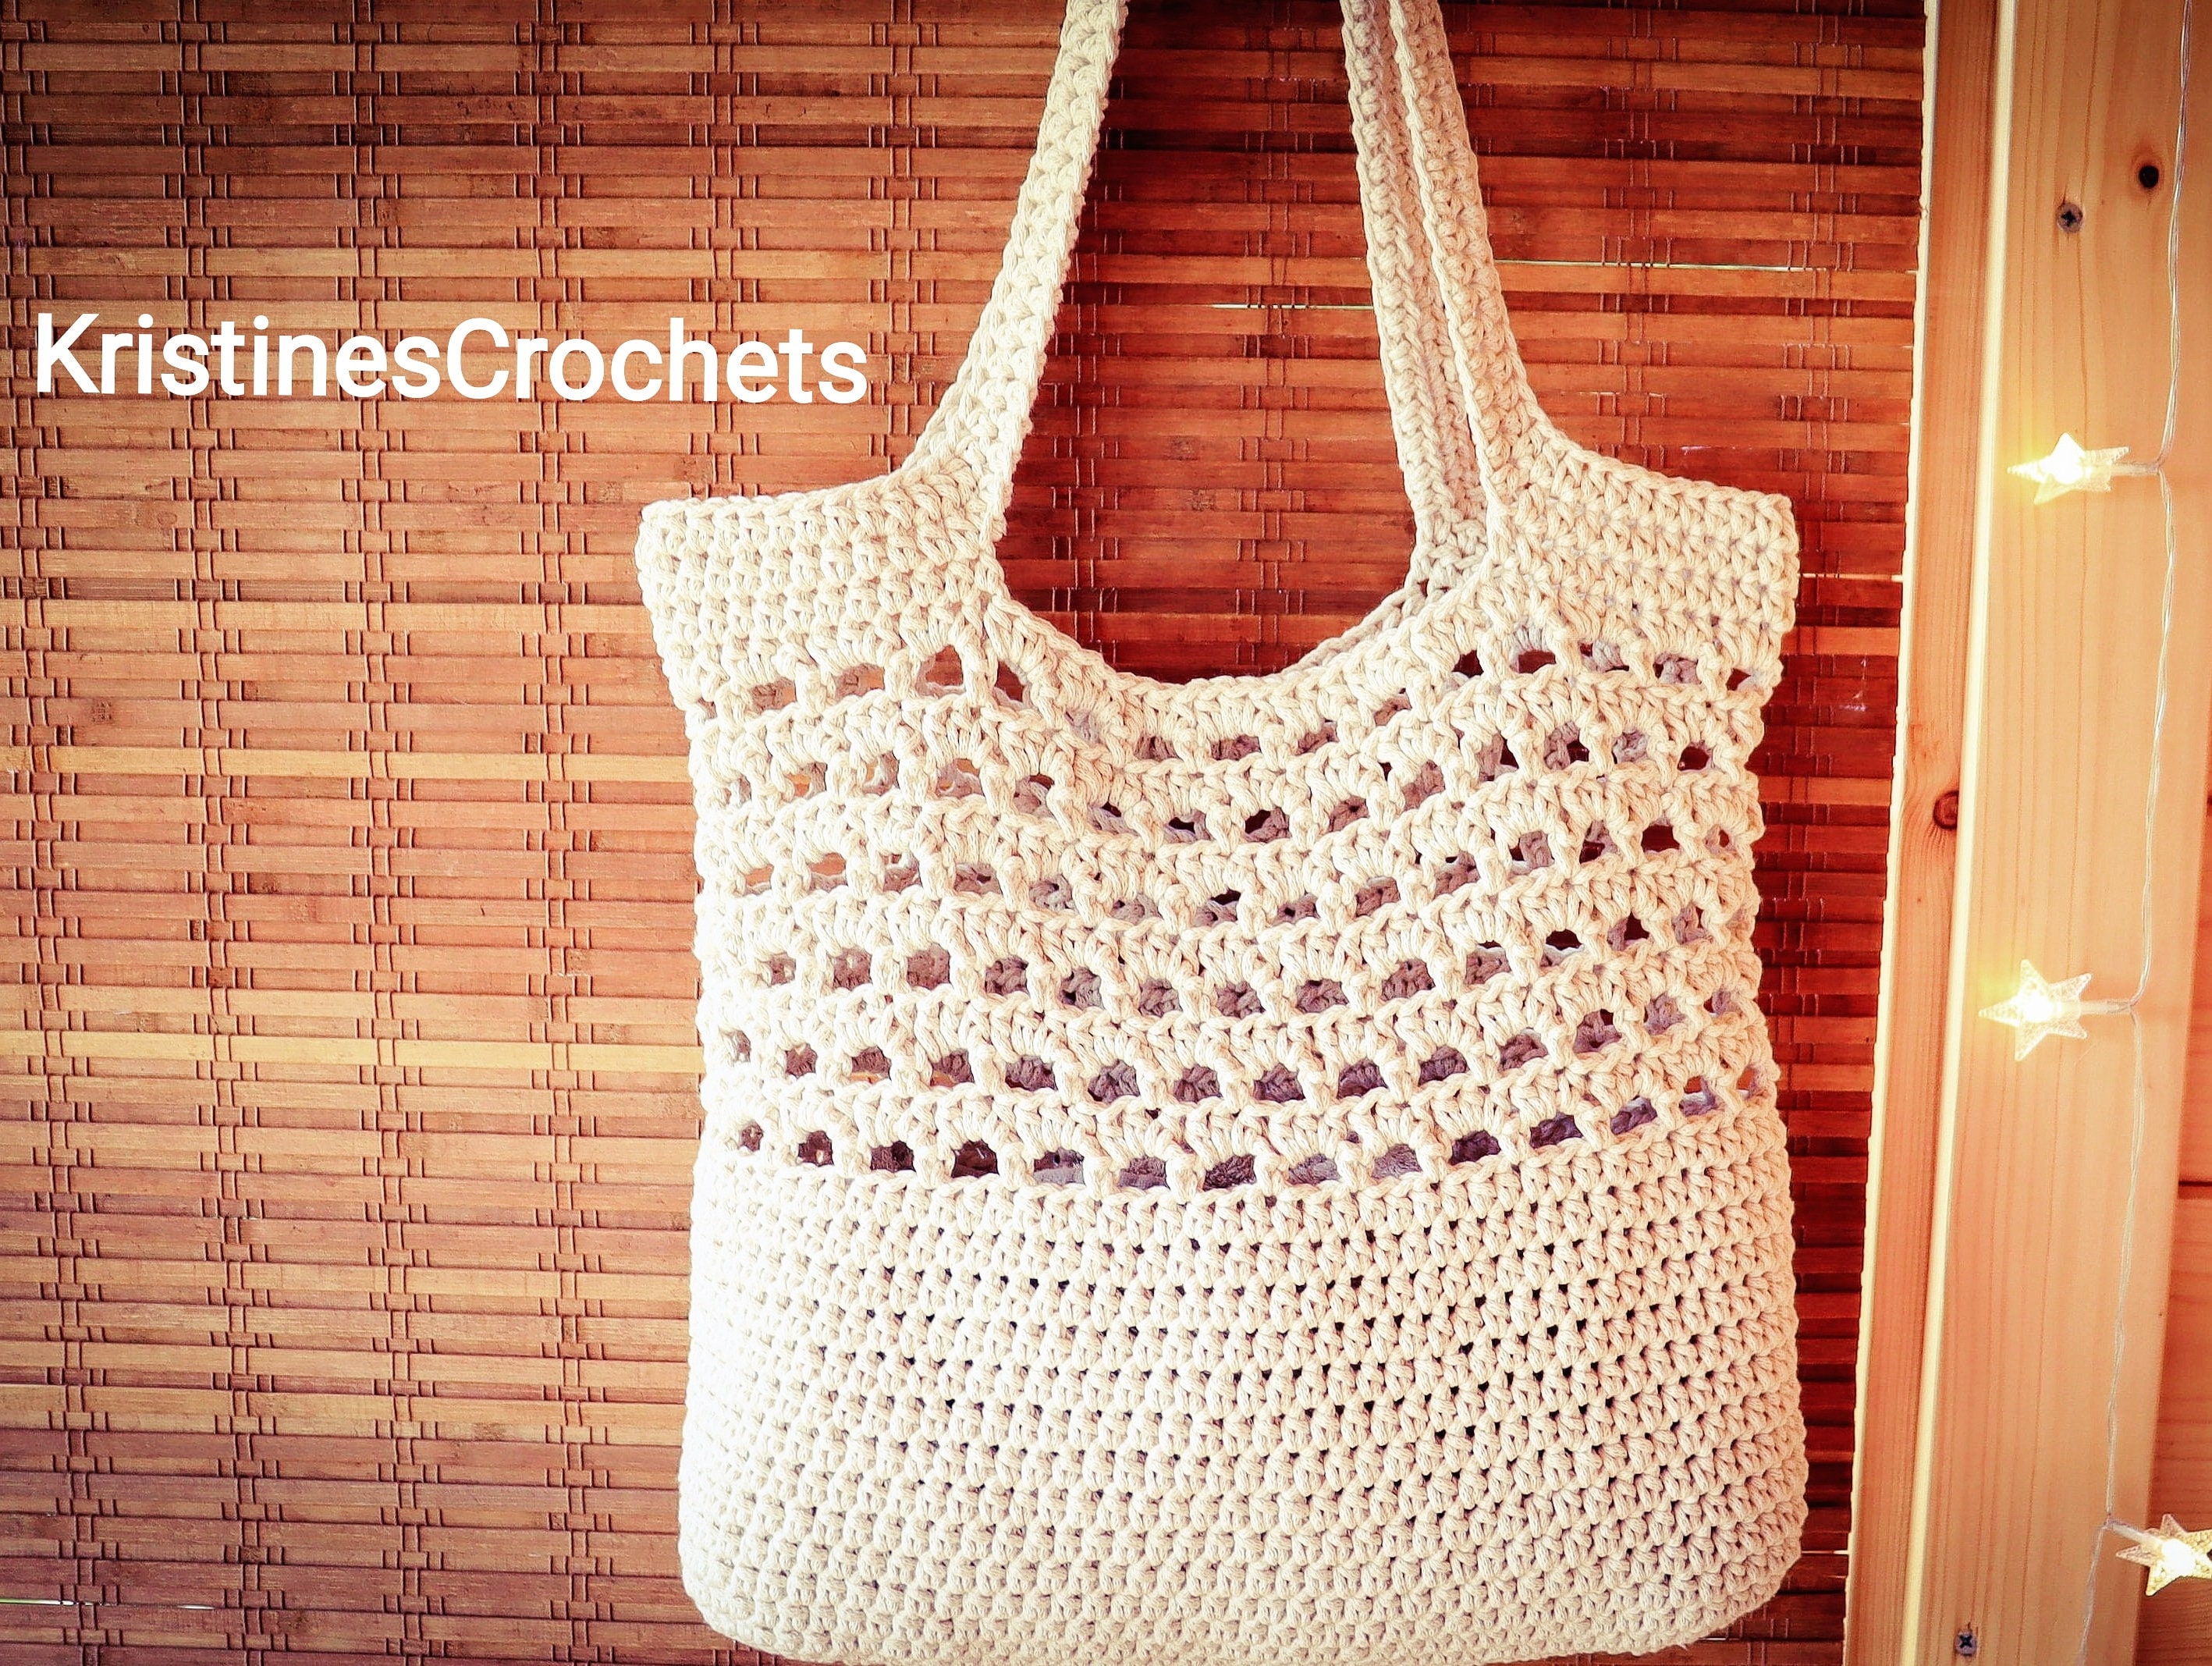 Hippie Sling Crochet Bag Pattern - Hooked on Homemade Happiness